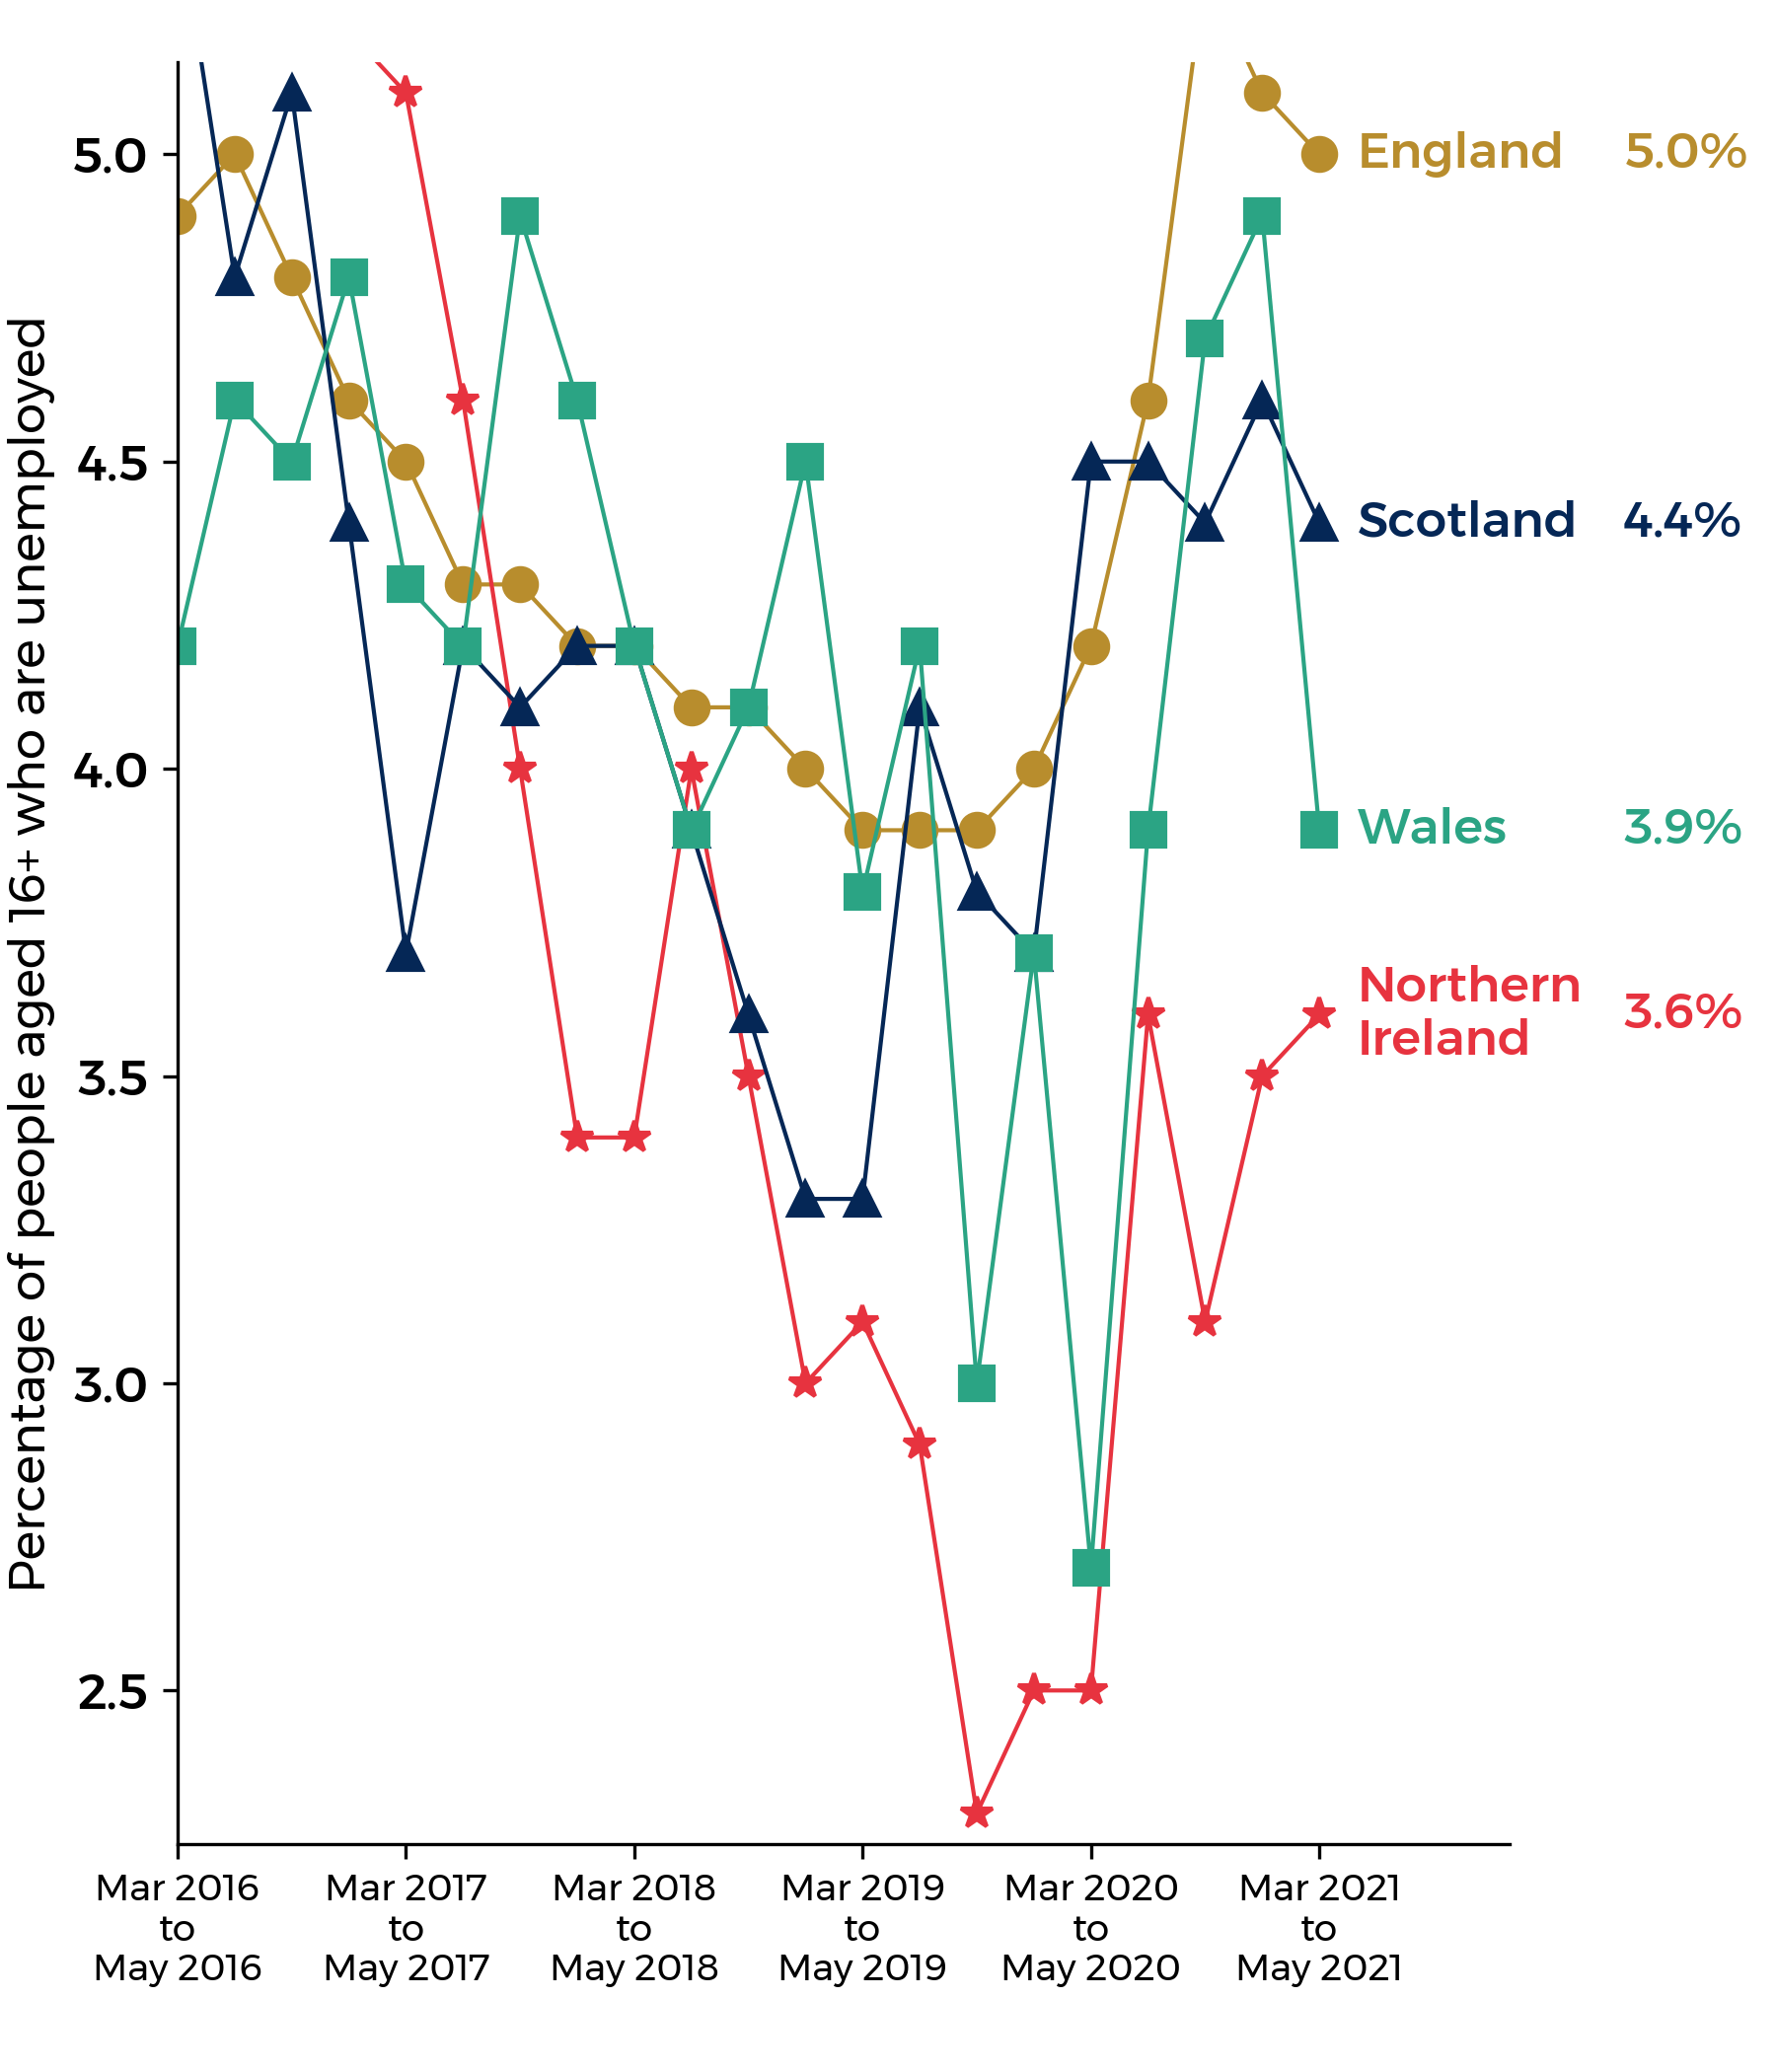 Line graph of age 16+ unemployment rates for Wales, England, Scotland and Northern Ireland. All show an overall decrease from over 5% in 2015 to below 4% in 2020. This was followed by a sharp overall increase since the beginning of 2020. Current figures are stated above.